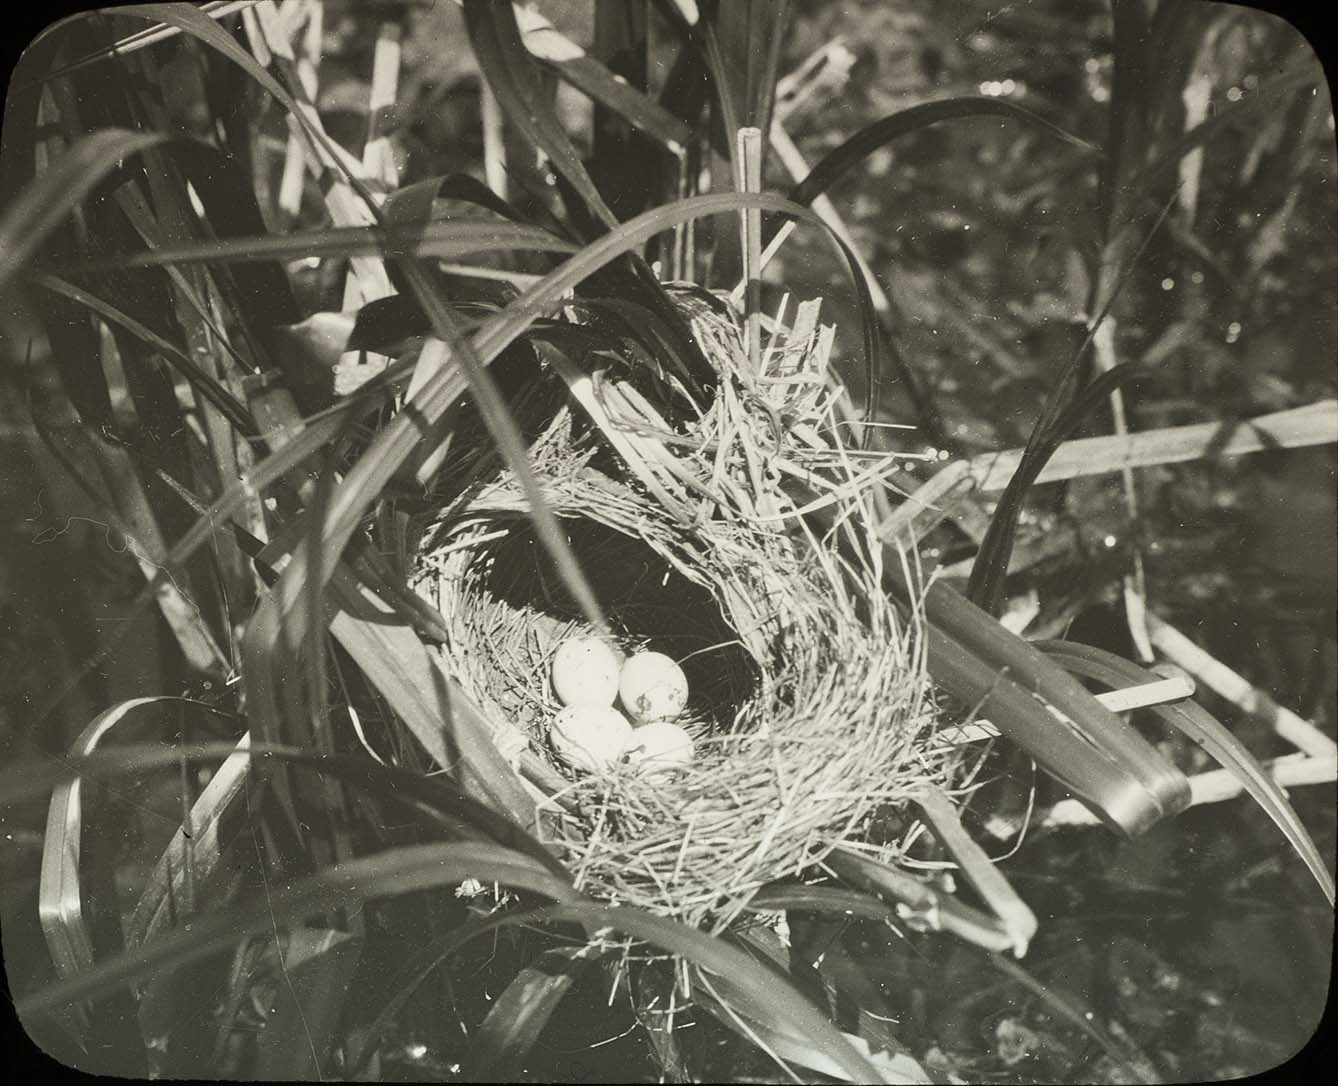 Lantern slide and photograph of eggs in a Red-winged Blackbird nest